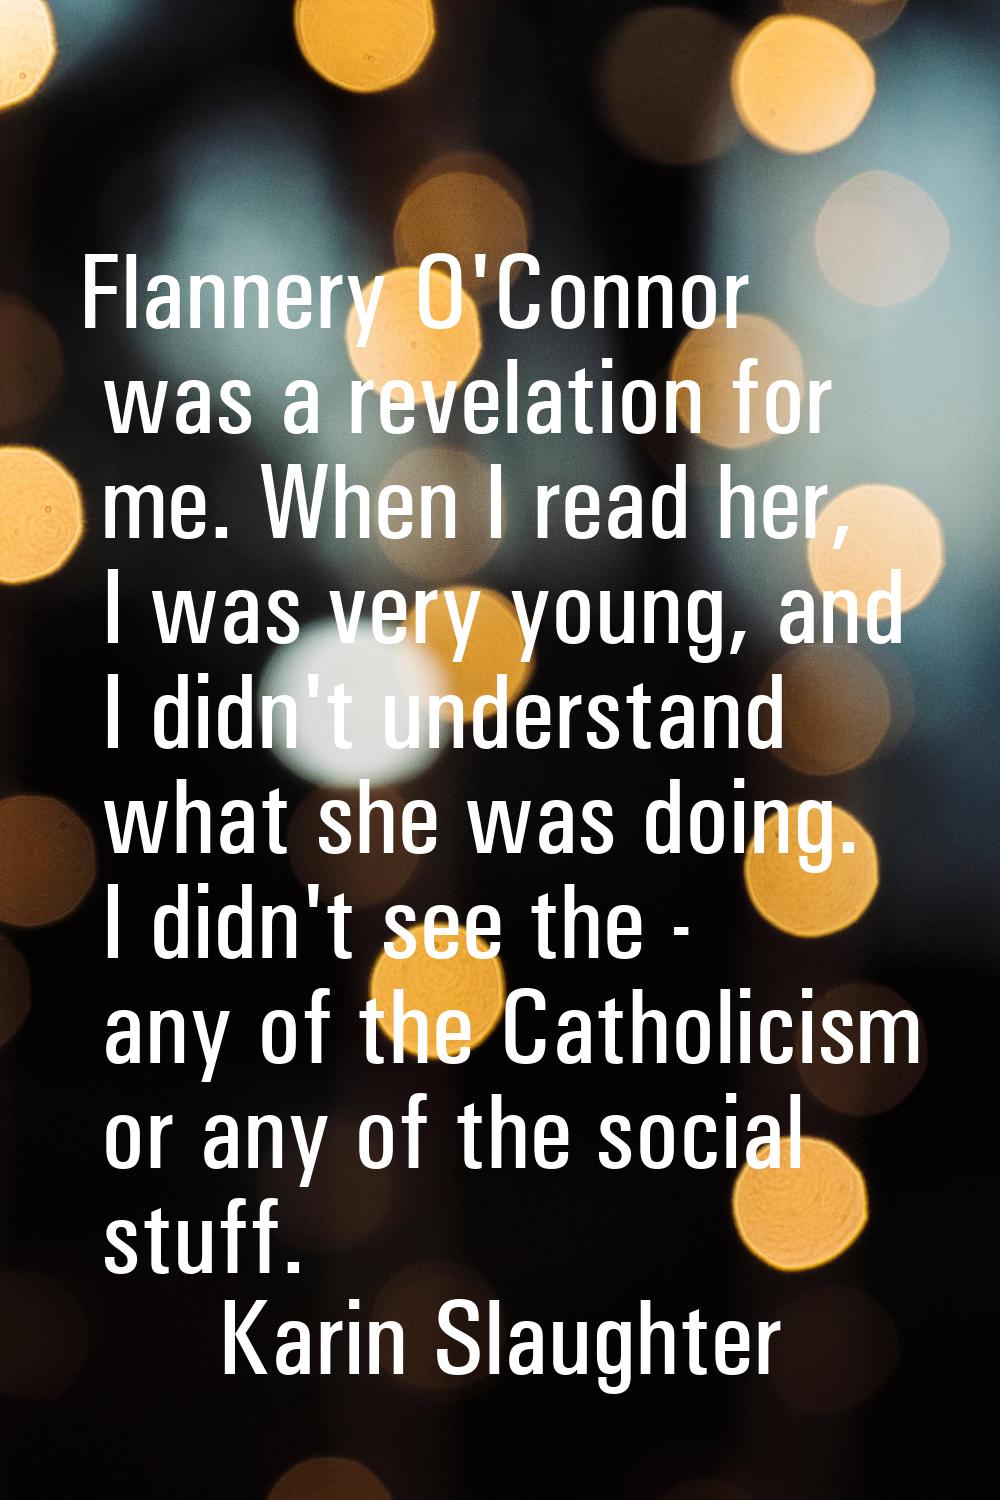 Flannery O'Connor was a revelation for me. When I read her, I was very young, and I didn't understa